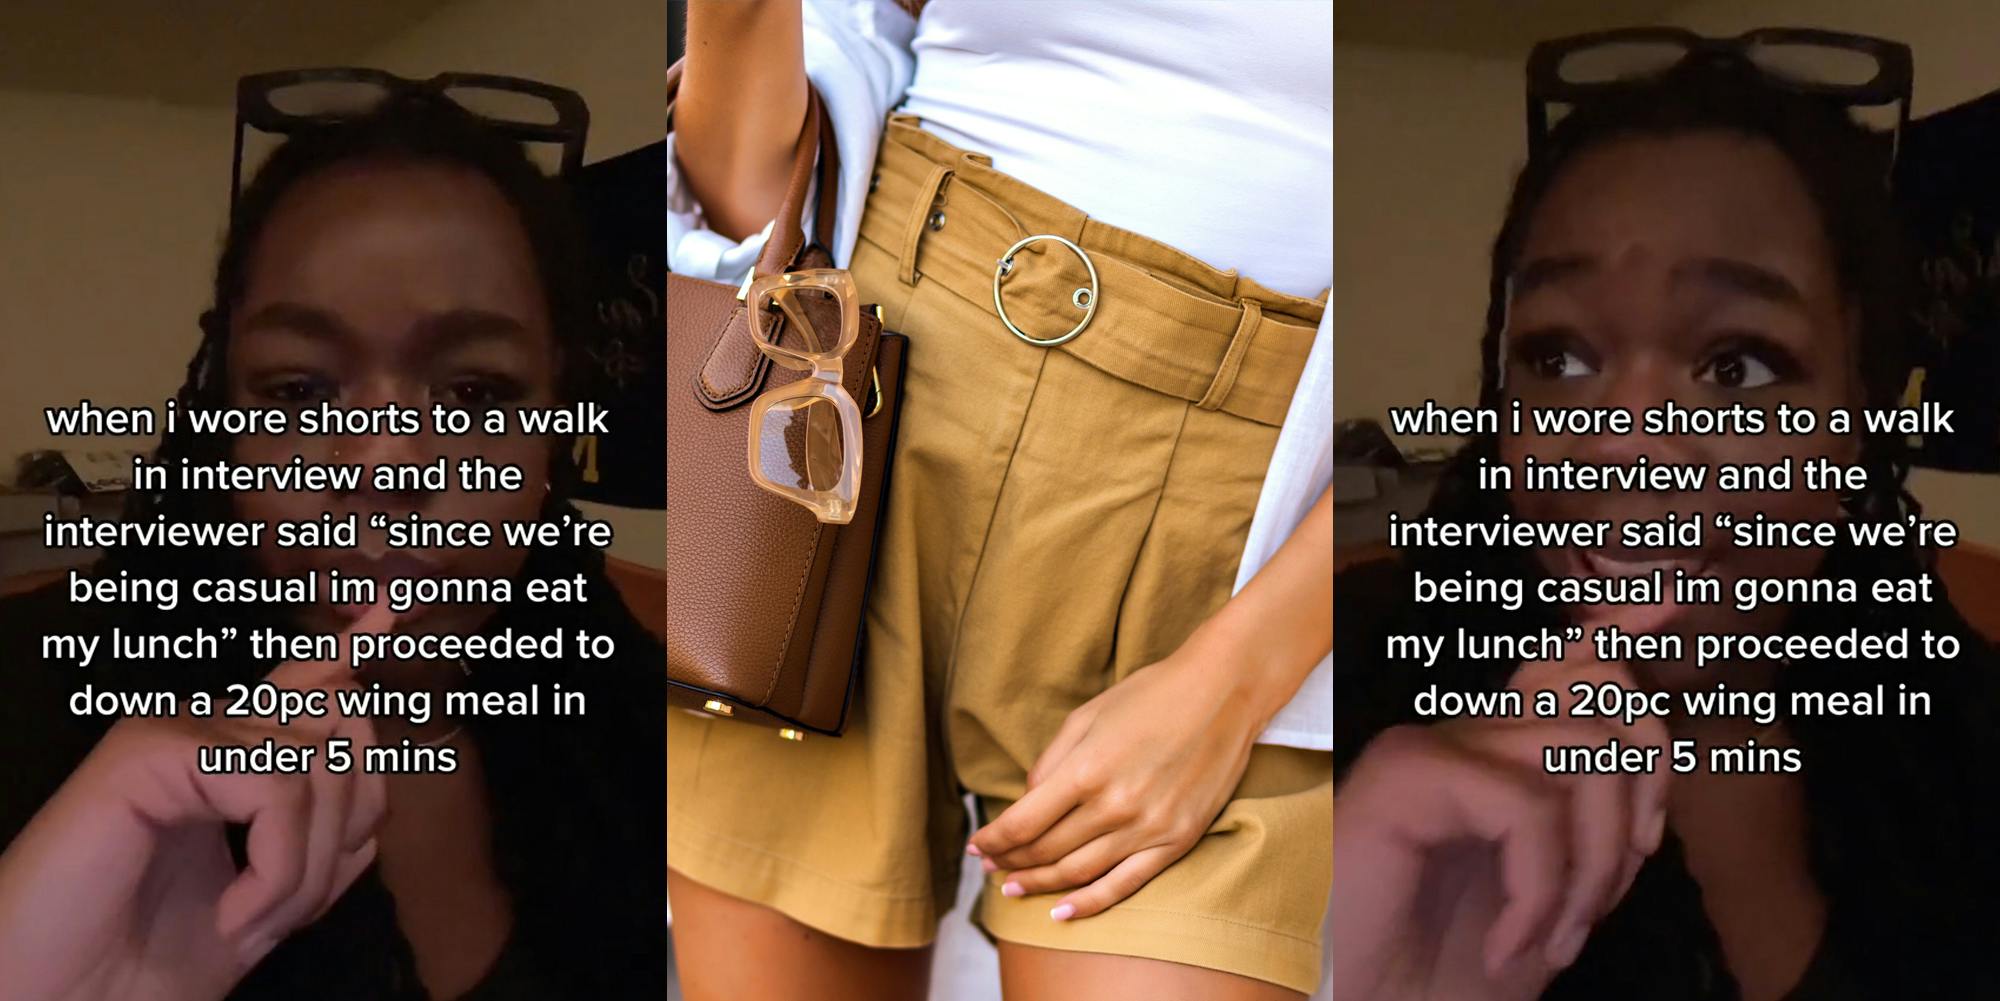 woman with caption "when i wore shorts to a walk in interview and the interviewer said "since we're being casual im gonna eat my lunch" then proceeded to down a 20pc wing meal in under 5 mins" (l) woman in shorts (c) woman with caption "when i wore shorts to a walk in interview and the interviewer said "since we're being casual im gonna eat my lunch" then proceeded to down a 20pc wing meal in under 5 mins" (r)